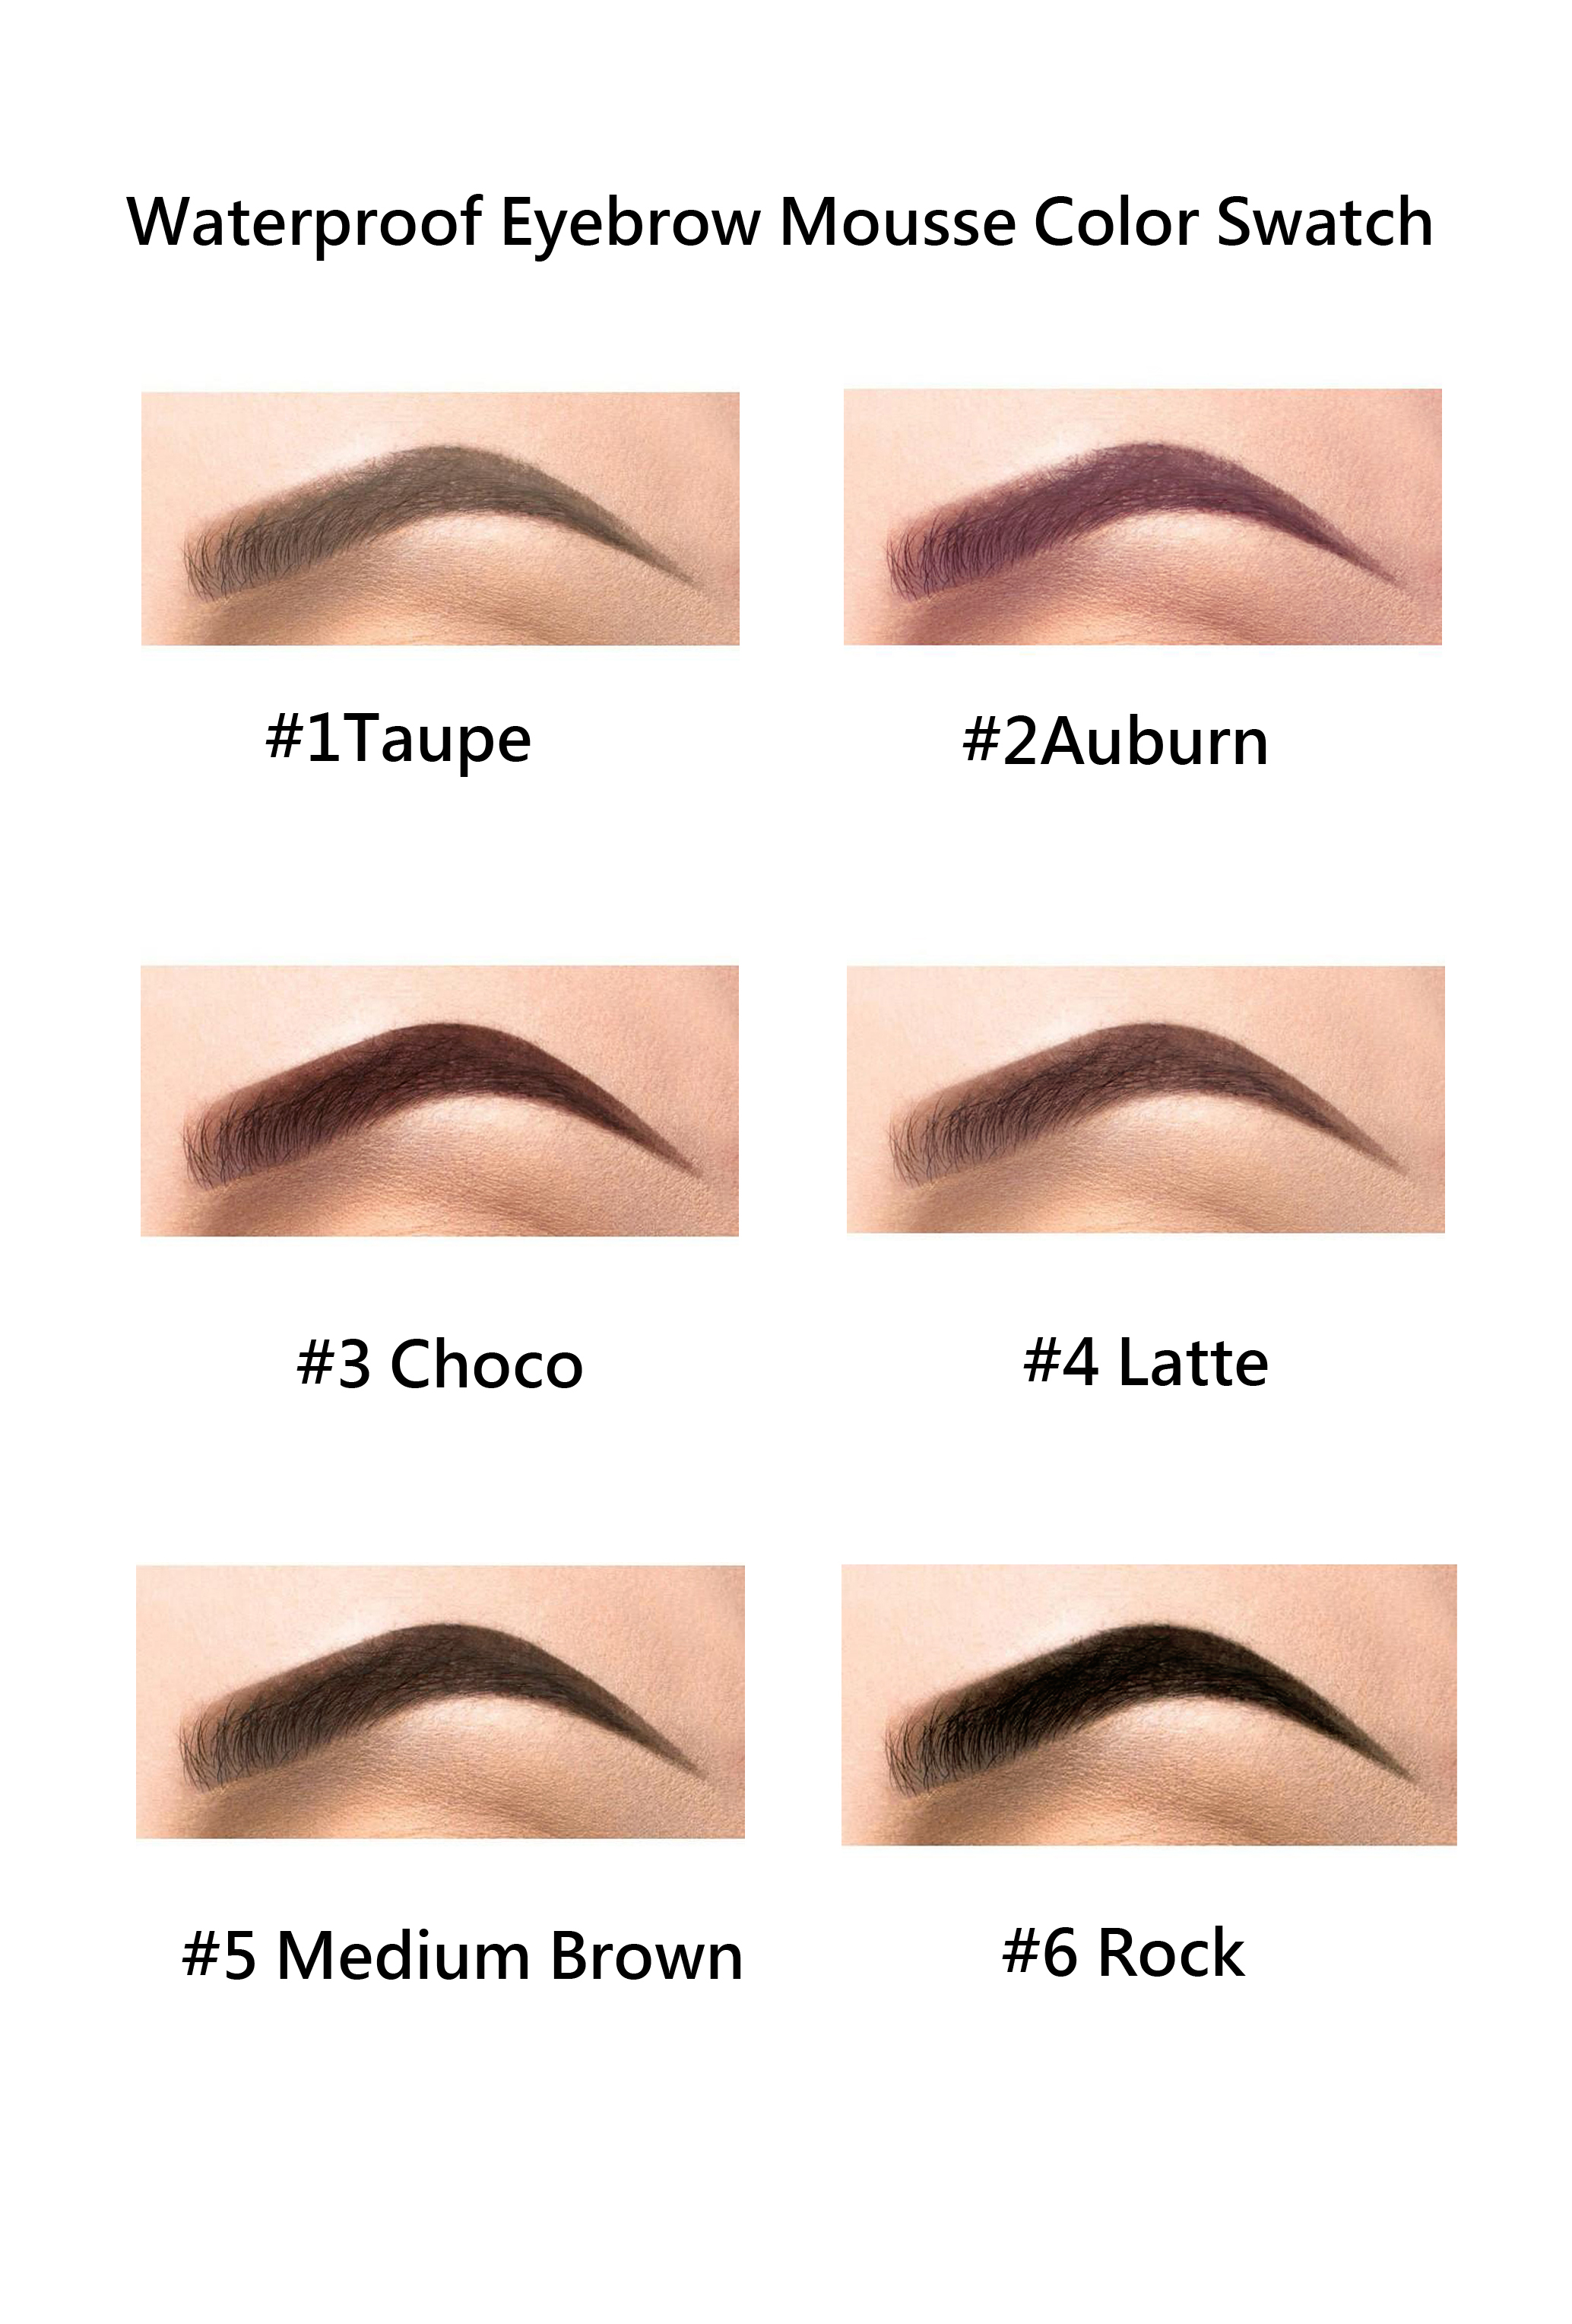 Brow swatch